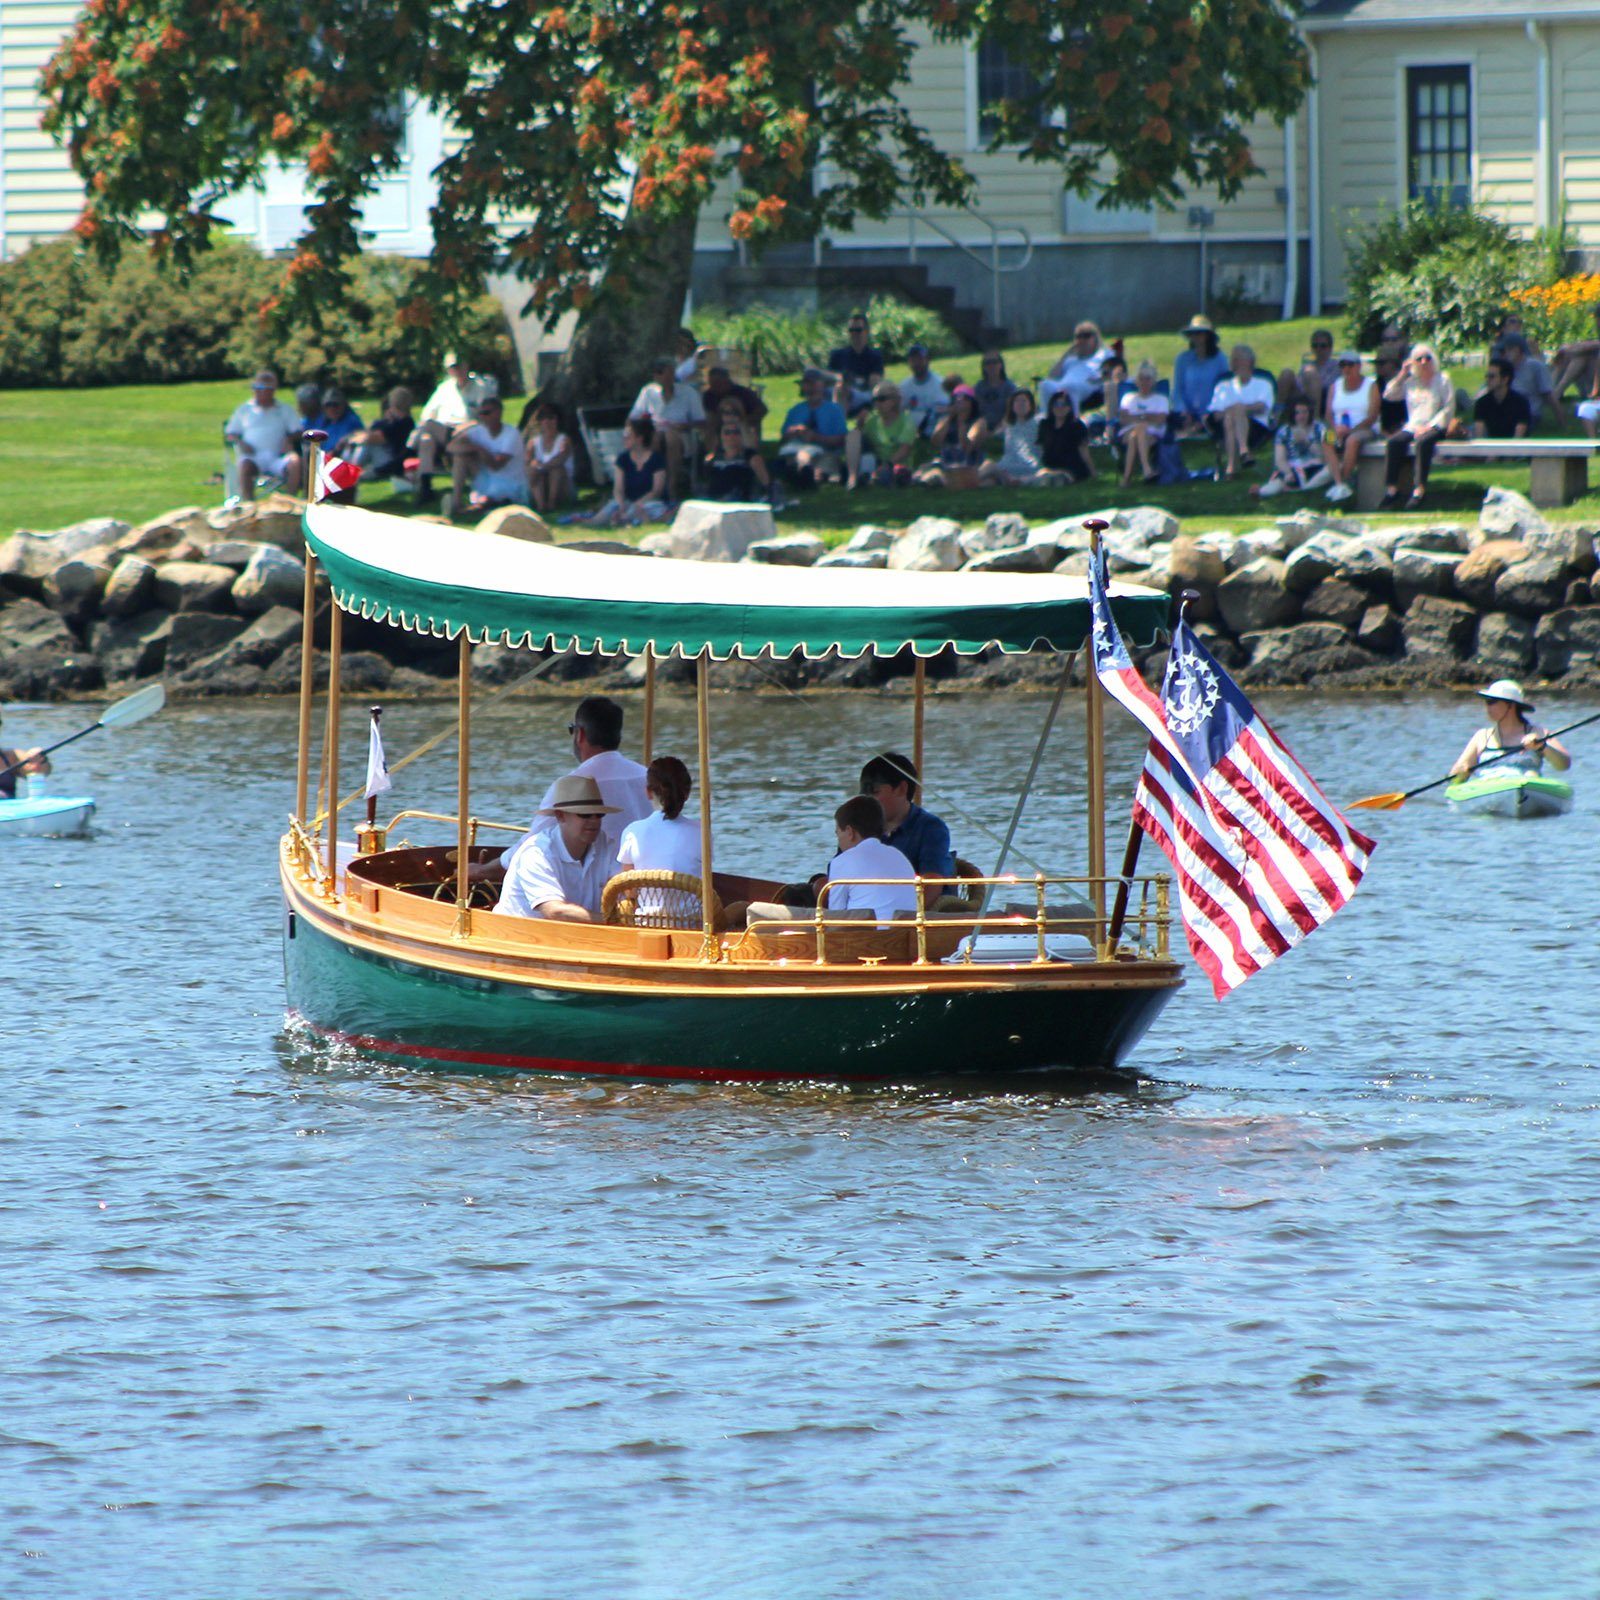 On The Shores of Mystic River, View The Antique Boat Parade